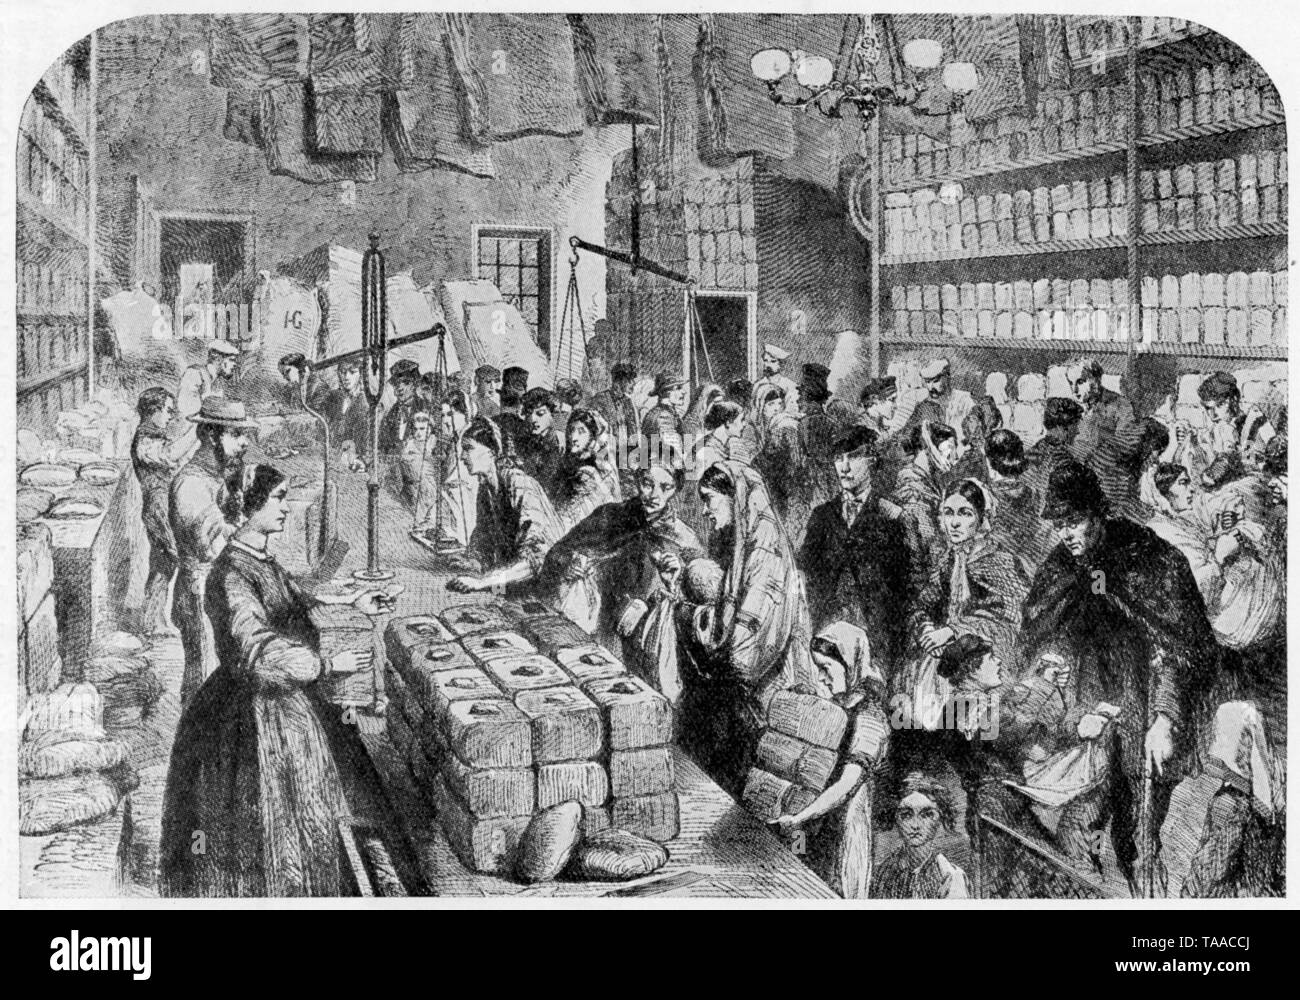 Scene during the cotton famine in Lancashire', 1862. Plate from The Illustrated London News, November 29th, 1863. The cotton famine was a depression in the textile industry in the North West of England brought about by the interruption of imports of cotton from America caused by the American Civil War. This engraving depicts a scene at the Manchester and Salford Provident Society, who issued provision tickets to help relieve the prevalent distress. Stock Photo